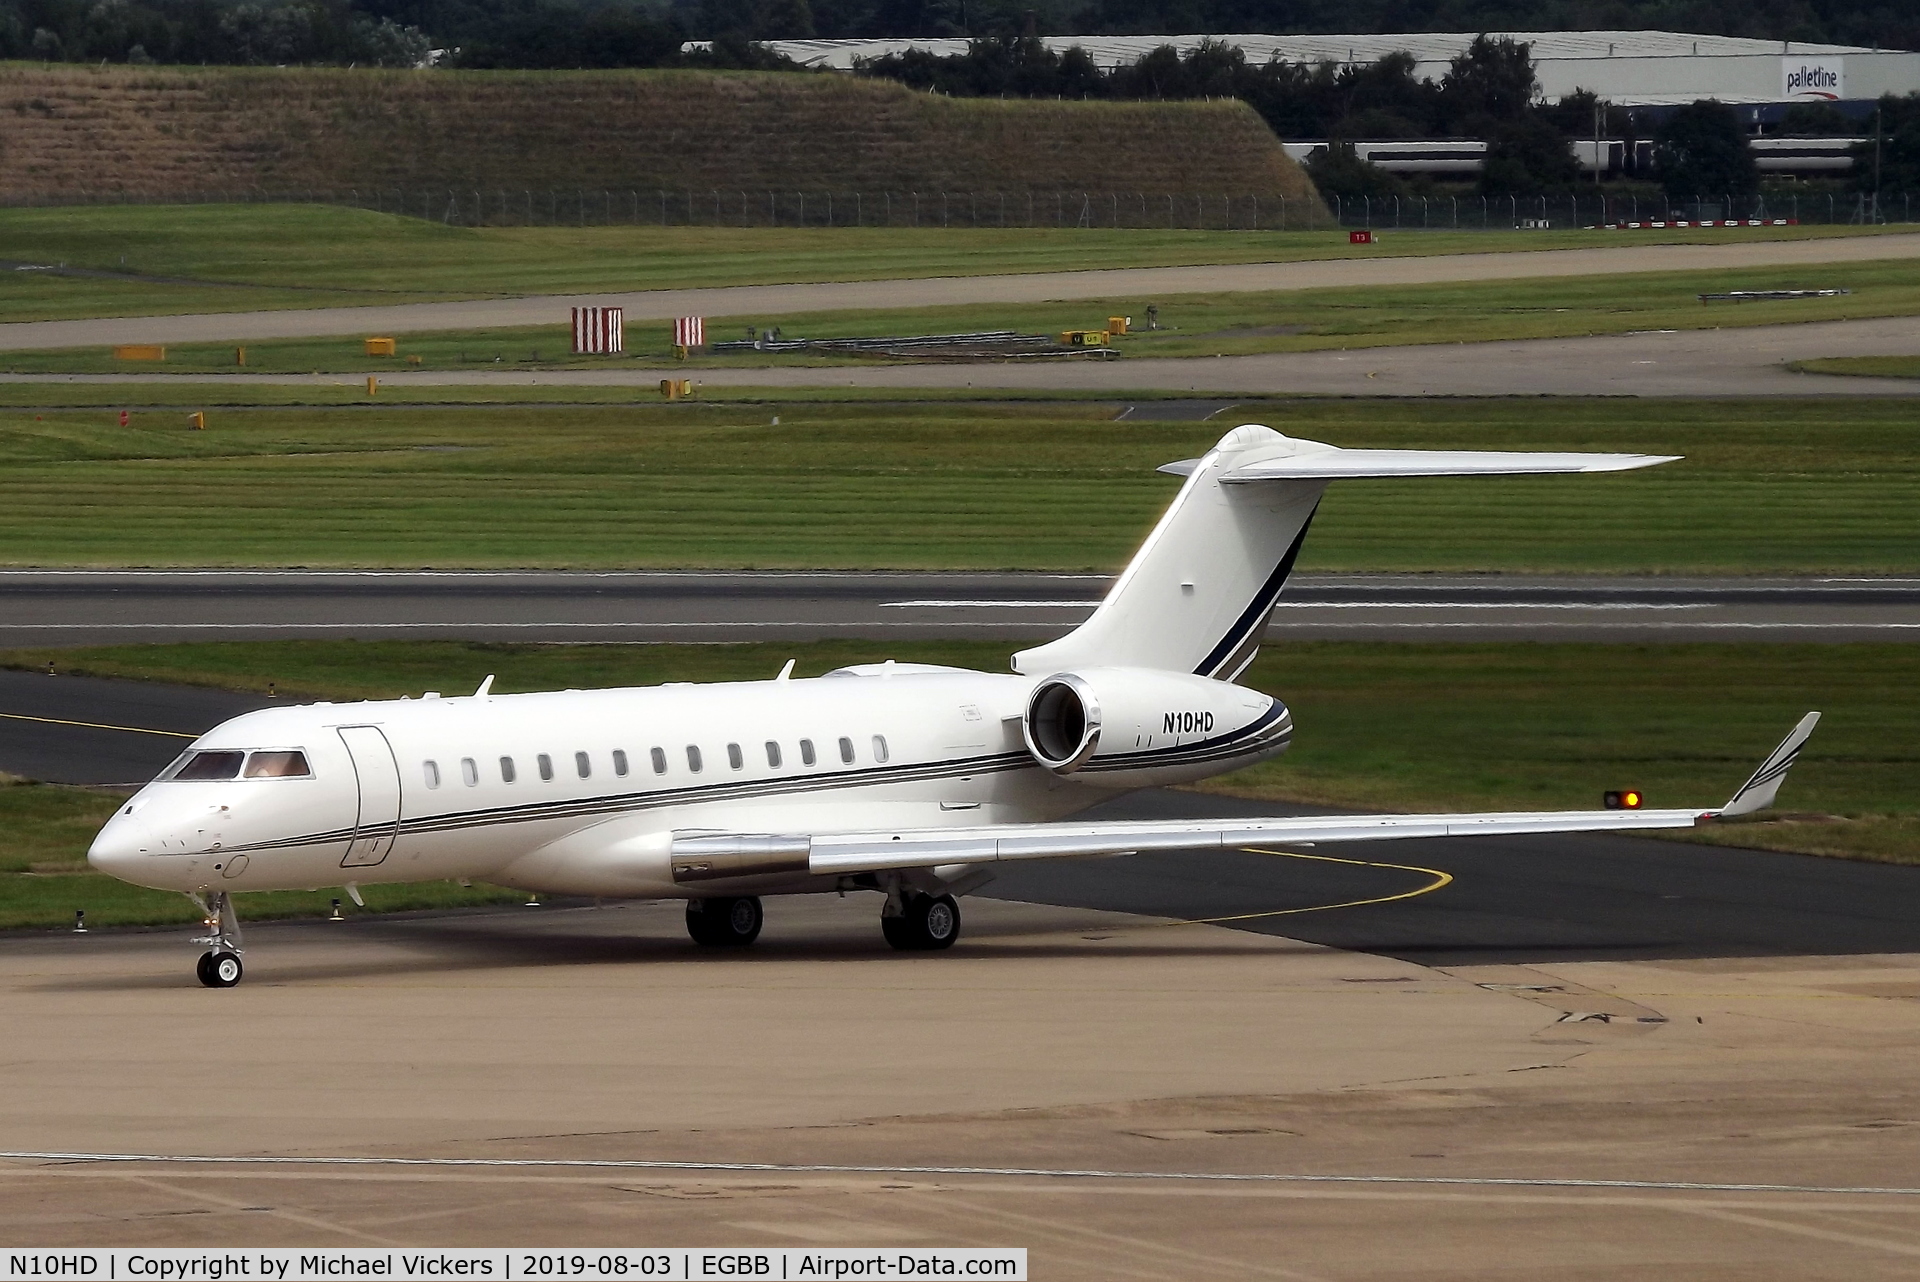 N10HD, 2015 Bombardier BD-700-1A10 Global 6000 C/N 9682, Just landed on runway 15 and taxying to stand